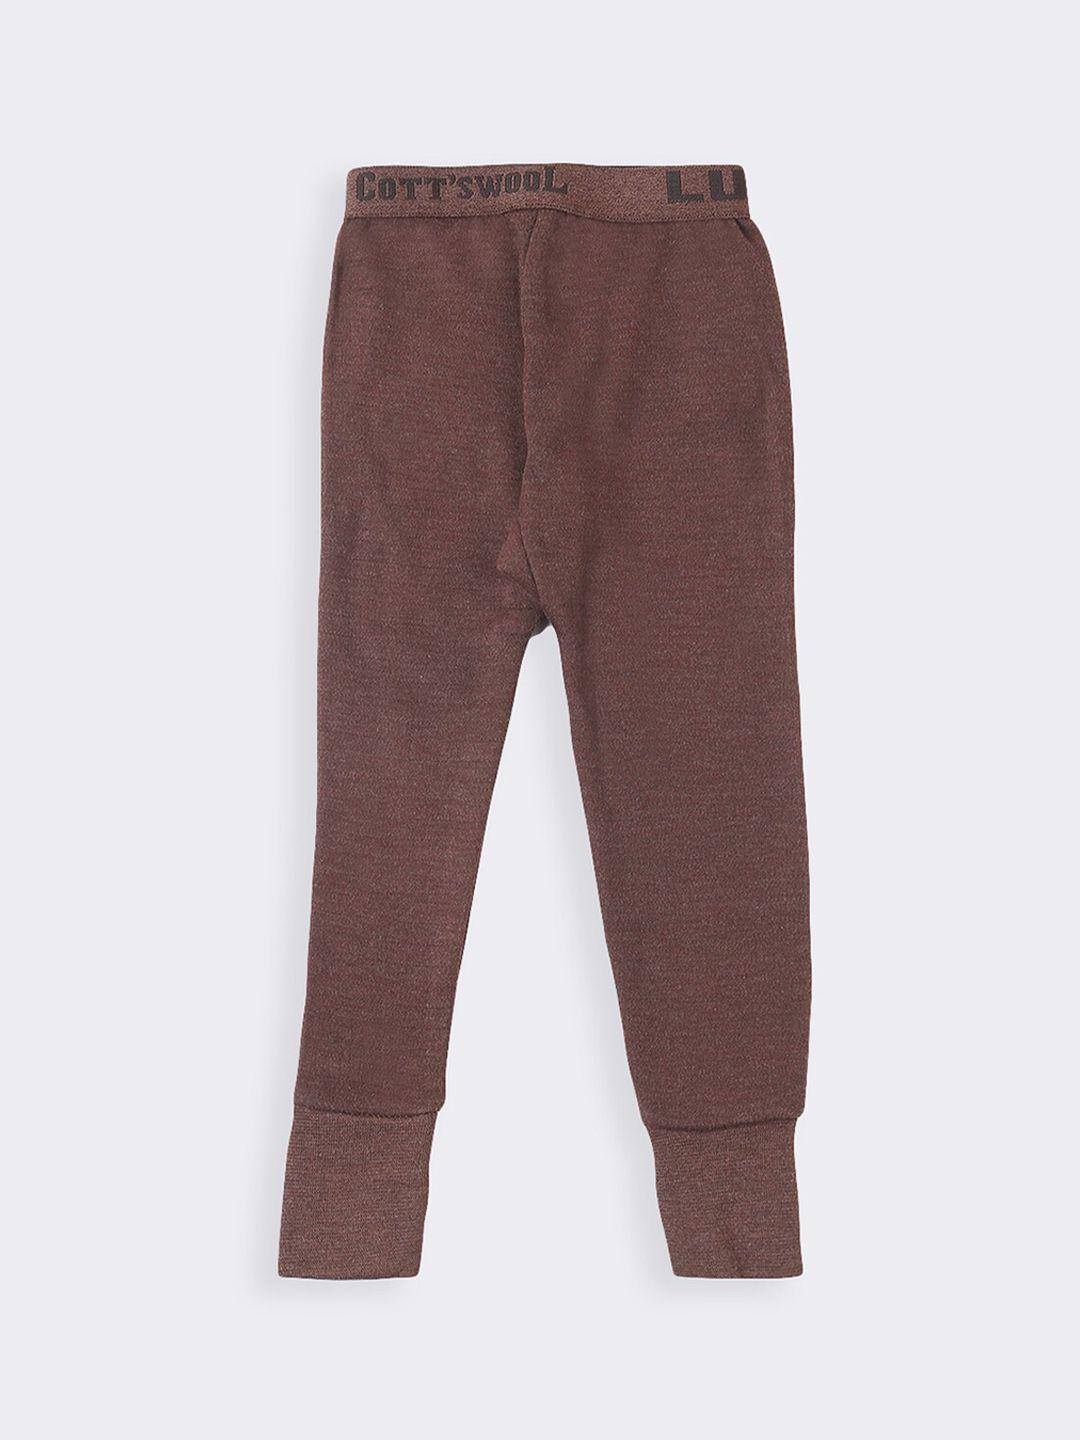 lux cottswool boys pack of 2 brown solid thermal bottoms